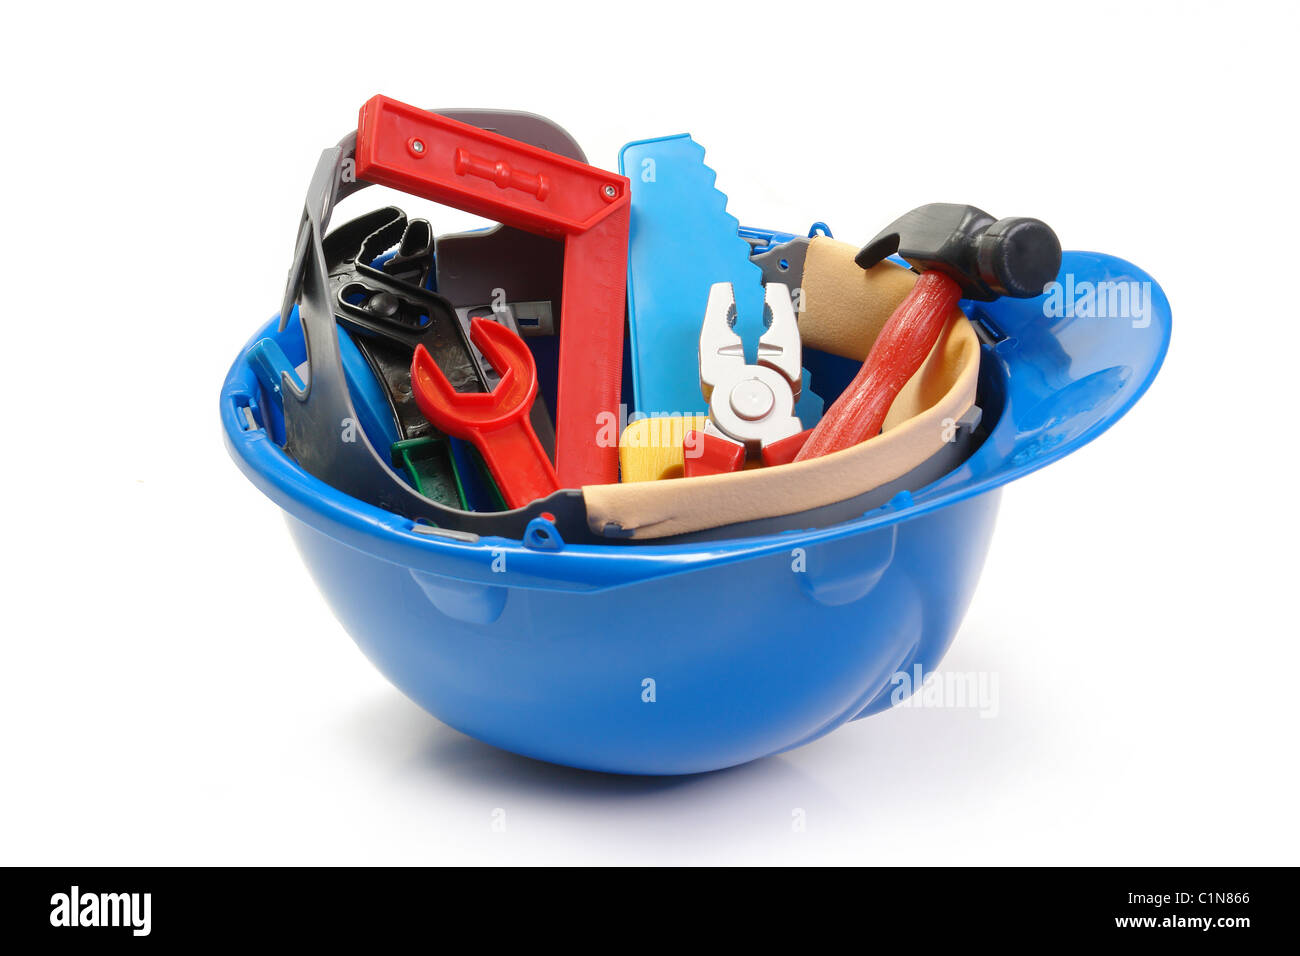 Set of plastic toy tools in blue helmet over white background Stock Photo